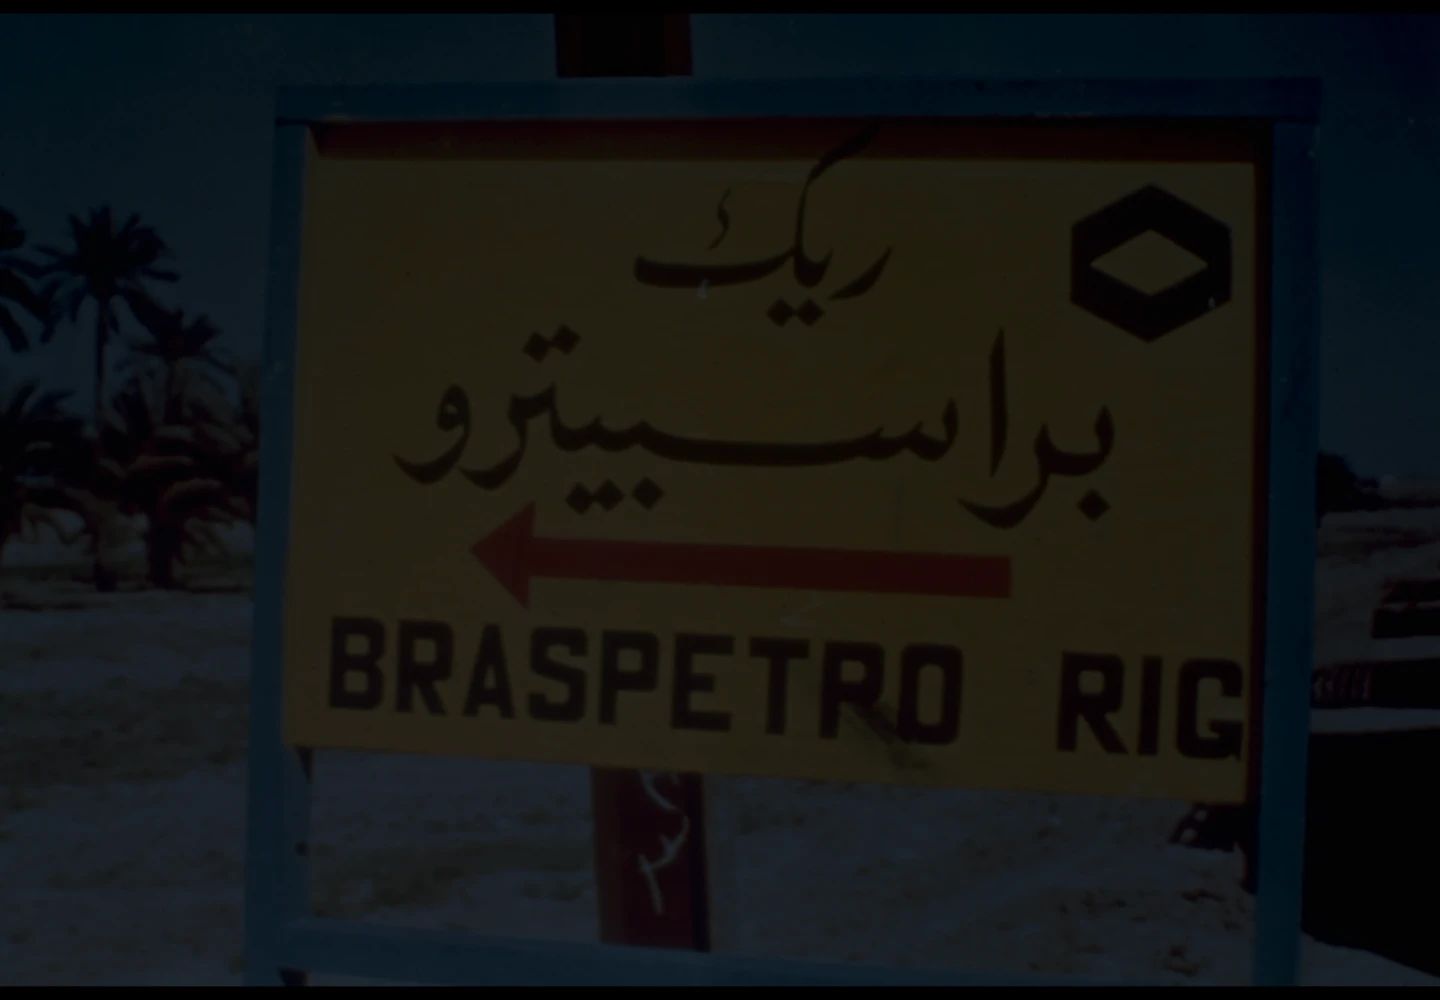 Old photo of a sign with the text “Braspetro Rig” below writing in an Arabic language.